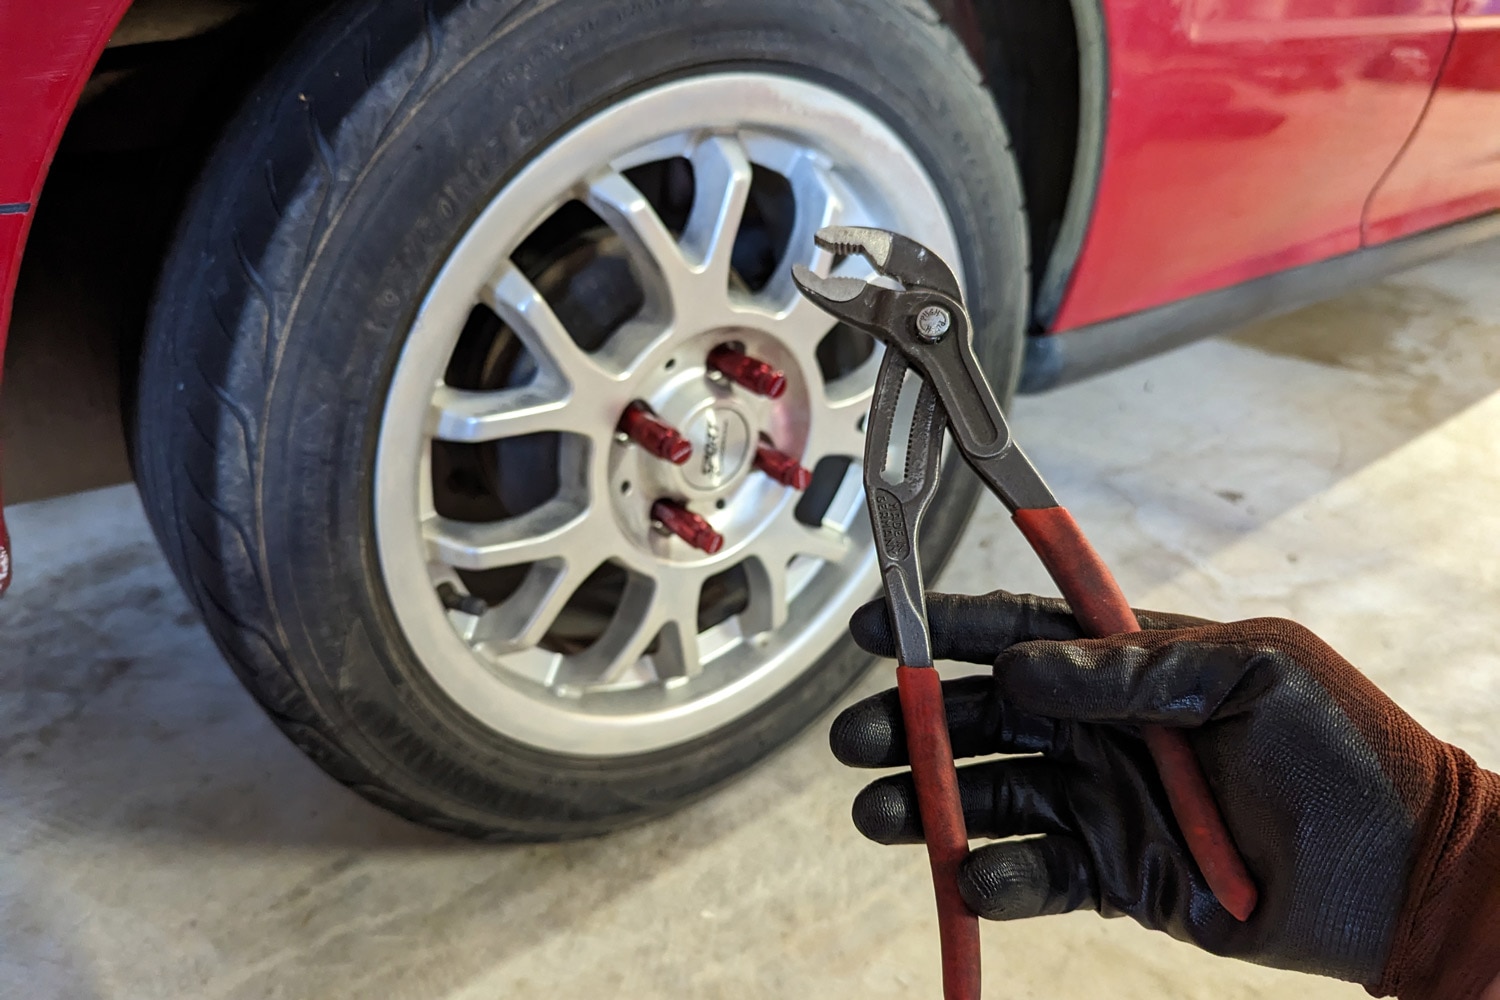 Wheel locks removed with tool in hand